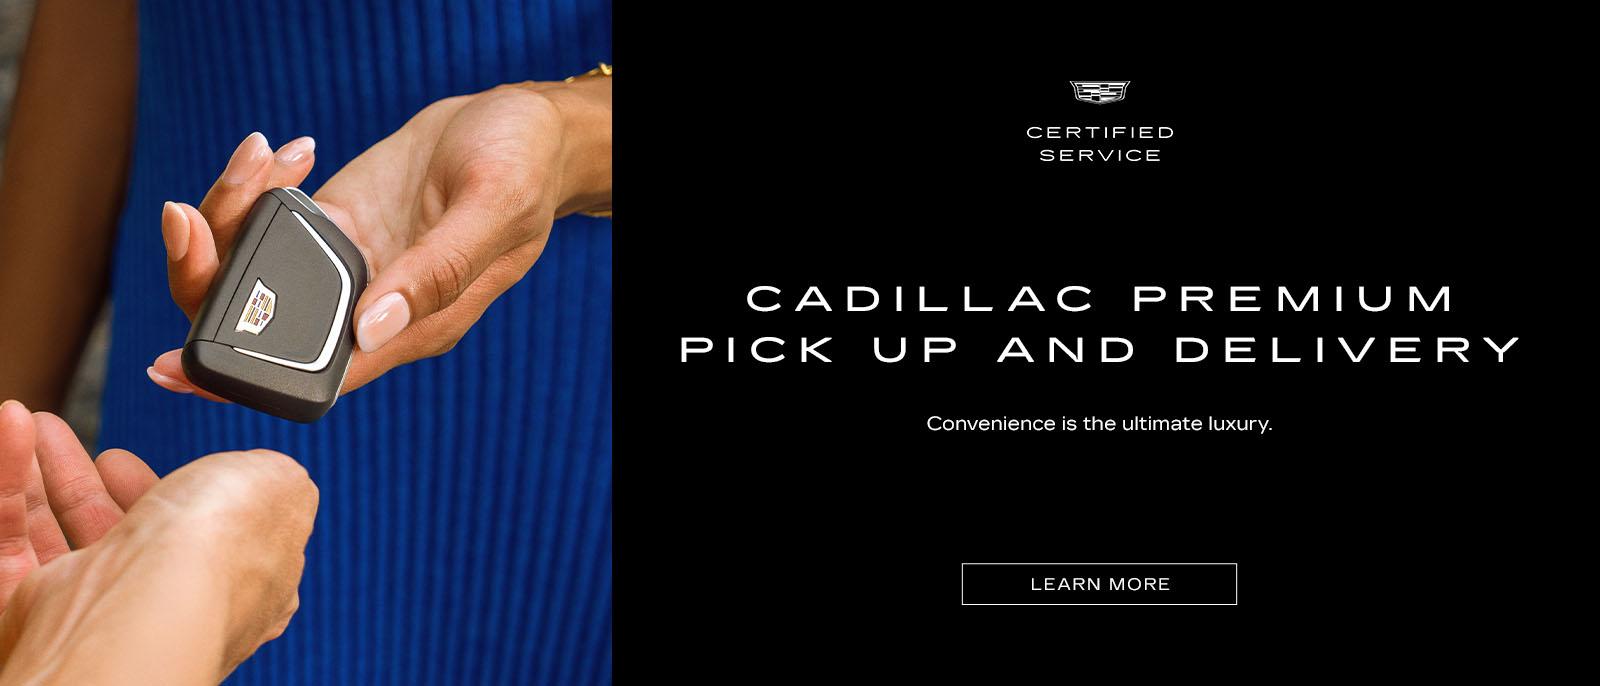 CADILLAC PREMIUM PICK UP AND DELIVERY*. Covvenience is the ultimate luxury.

Convenience is the ultimate luxury.